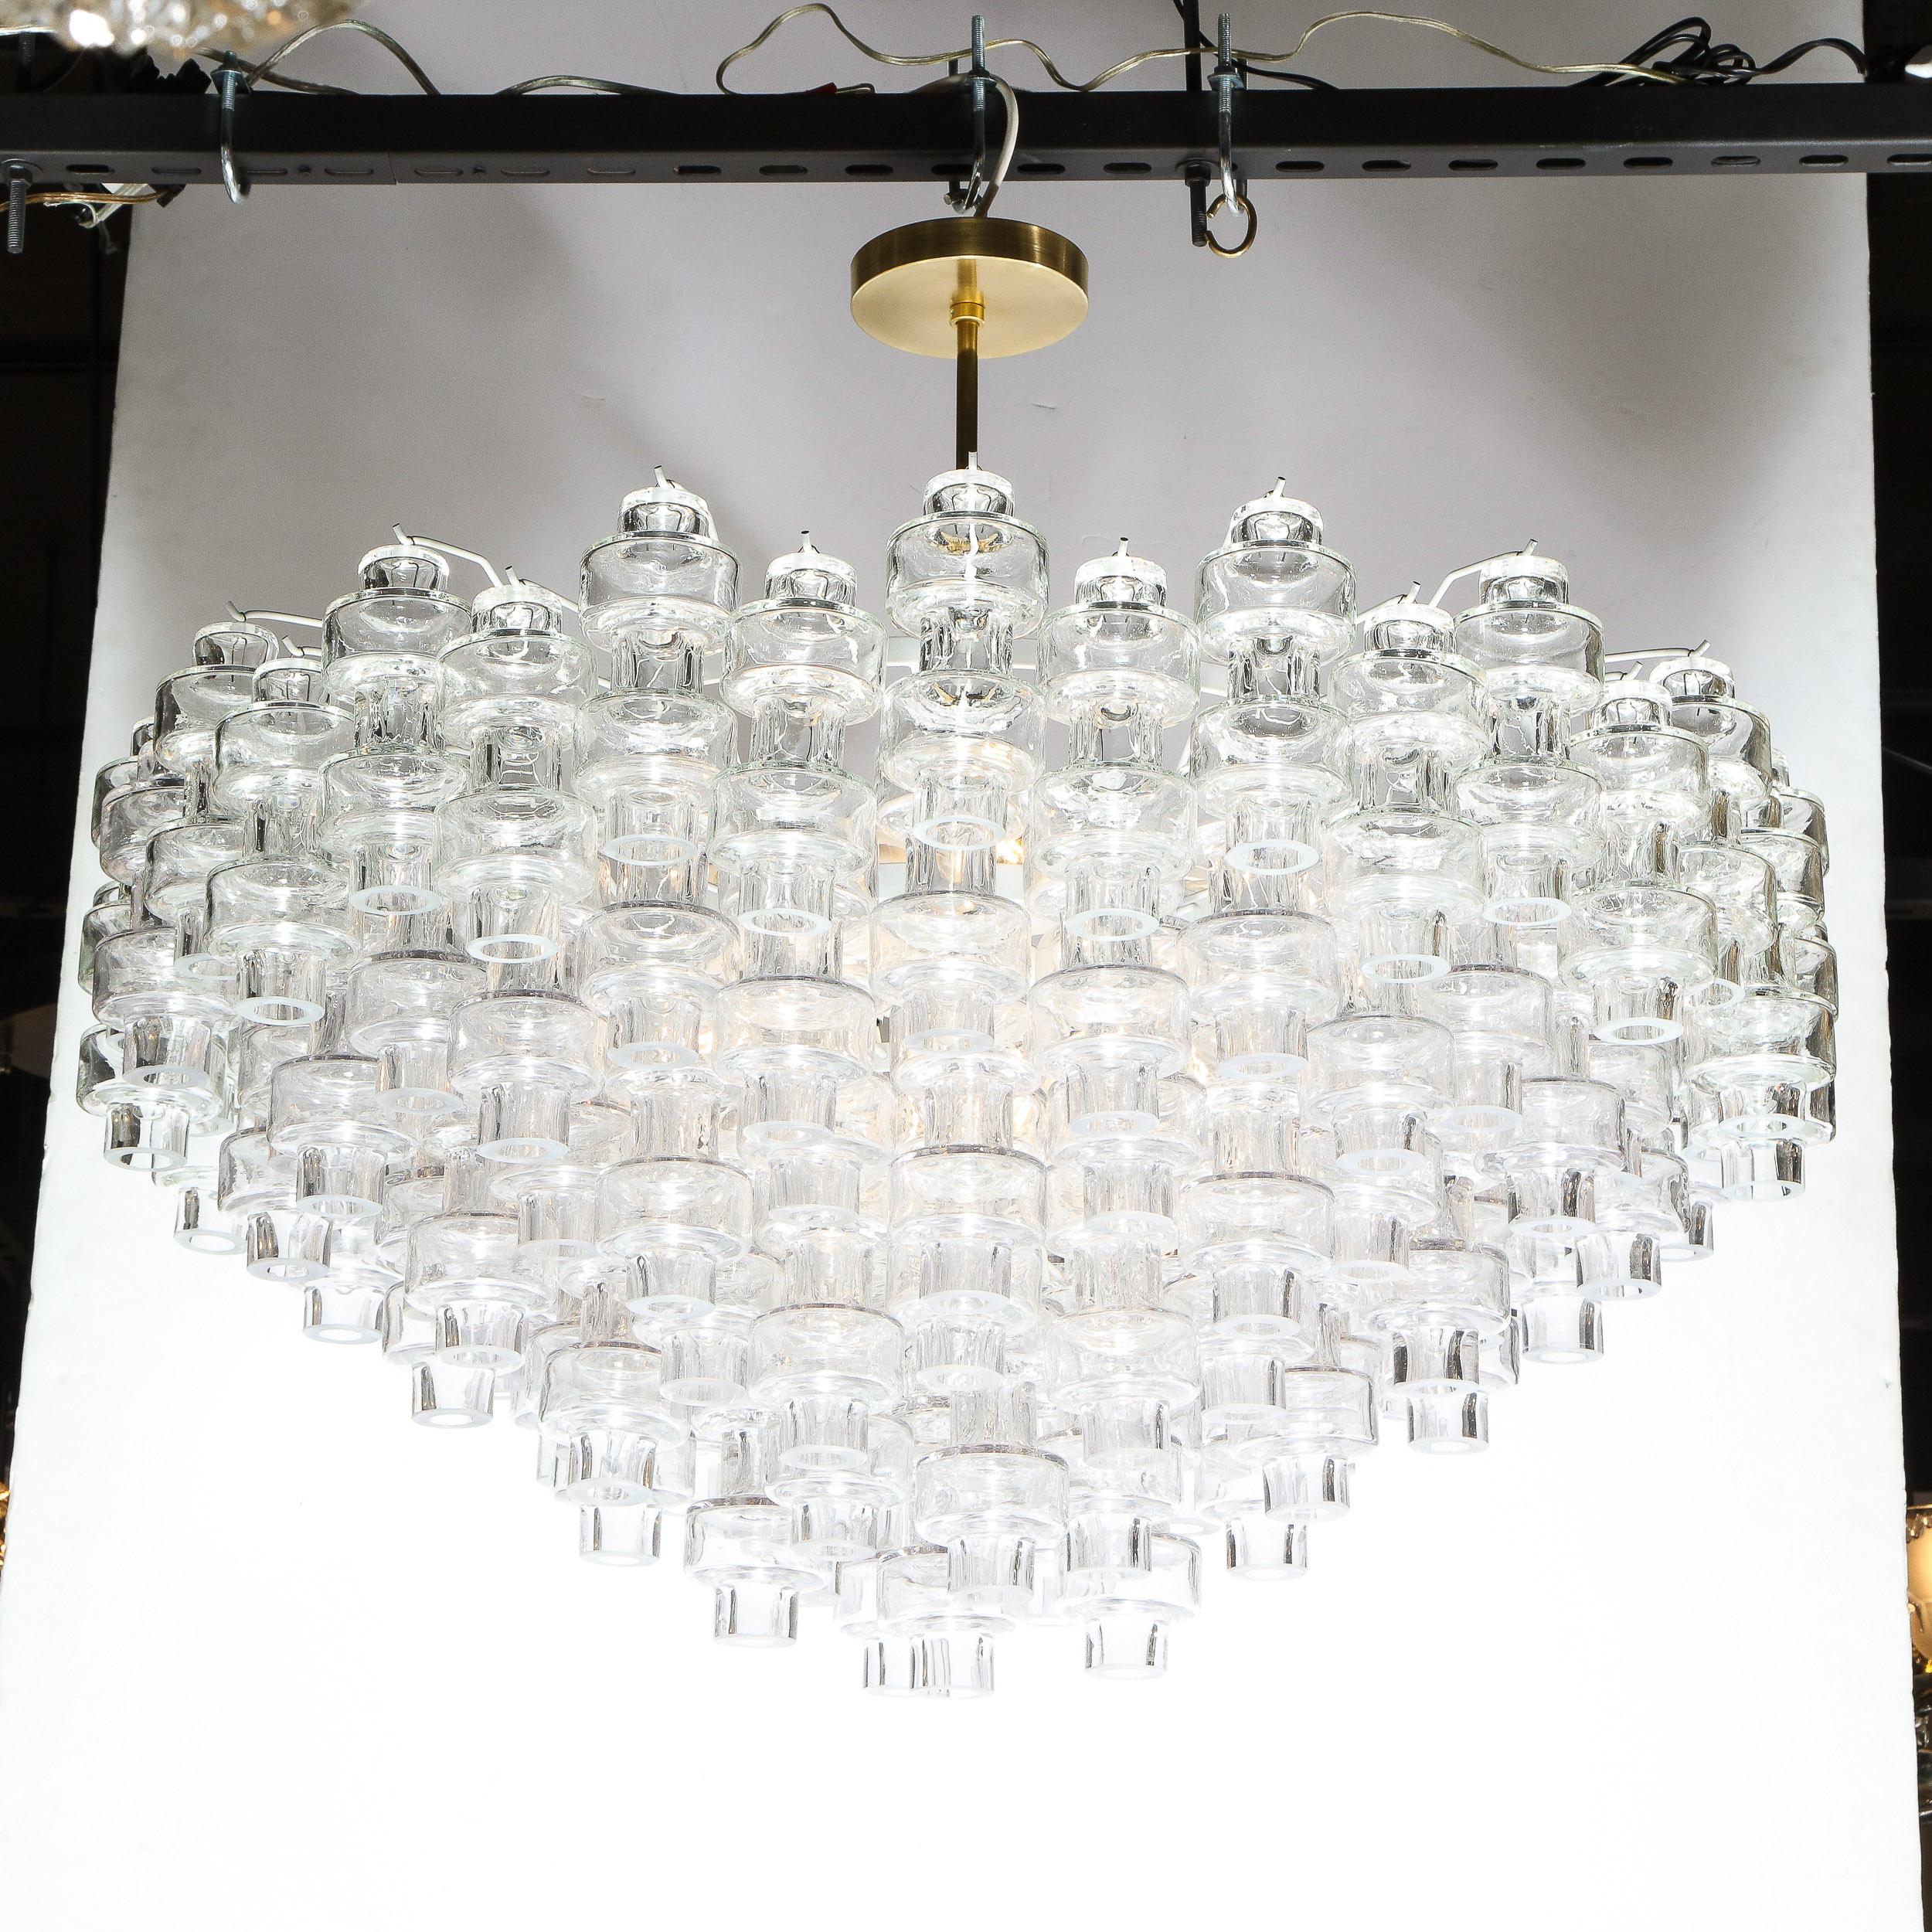 This outstanding Murano glass chandelier was realized in Murano, Italy- the island off the coast of Venice renowned for centuries for its superlative glass production. It features numerous translucent barbell shaped Murano glass shades hanging in a